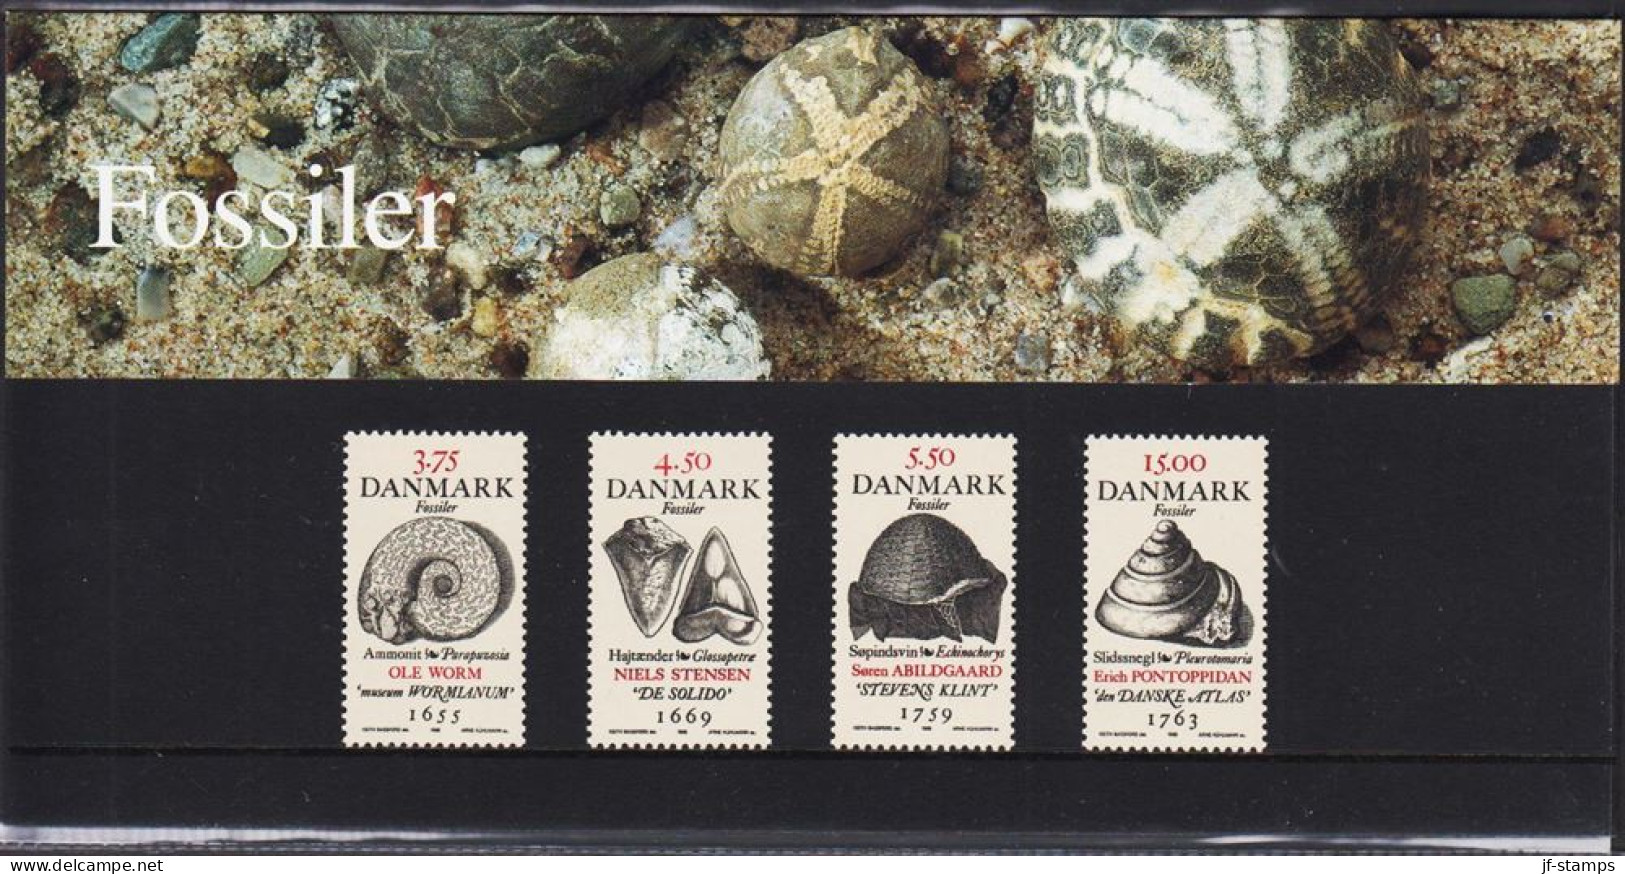 1998. DANMARK. Fossiler Complete Set In Official Folder (SM 32/1998) Never Hinged. (Michel 1195-1198) - JF544449 - Nuevos